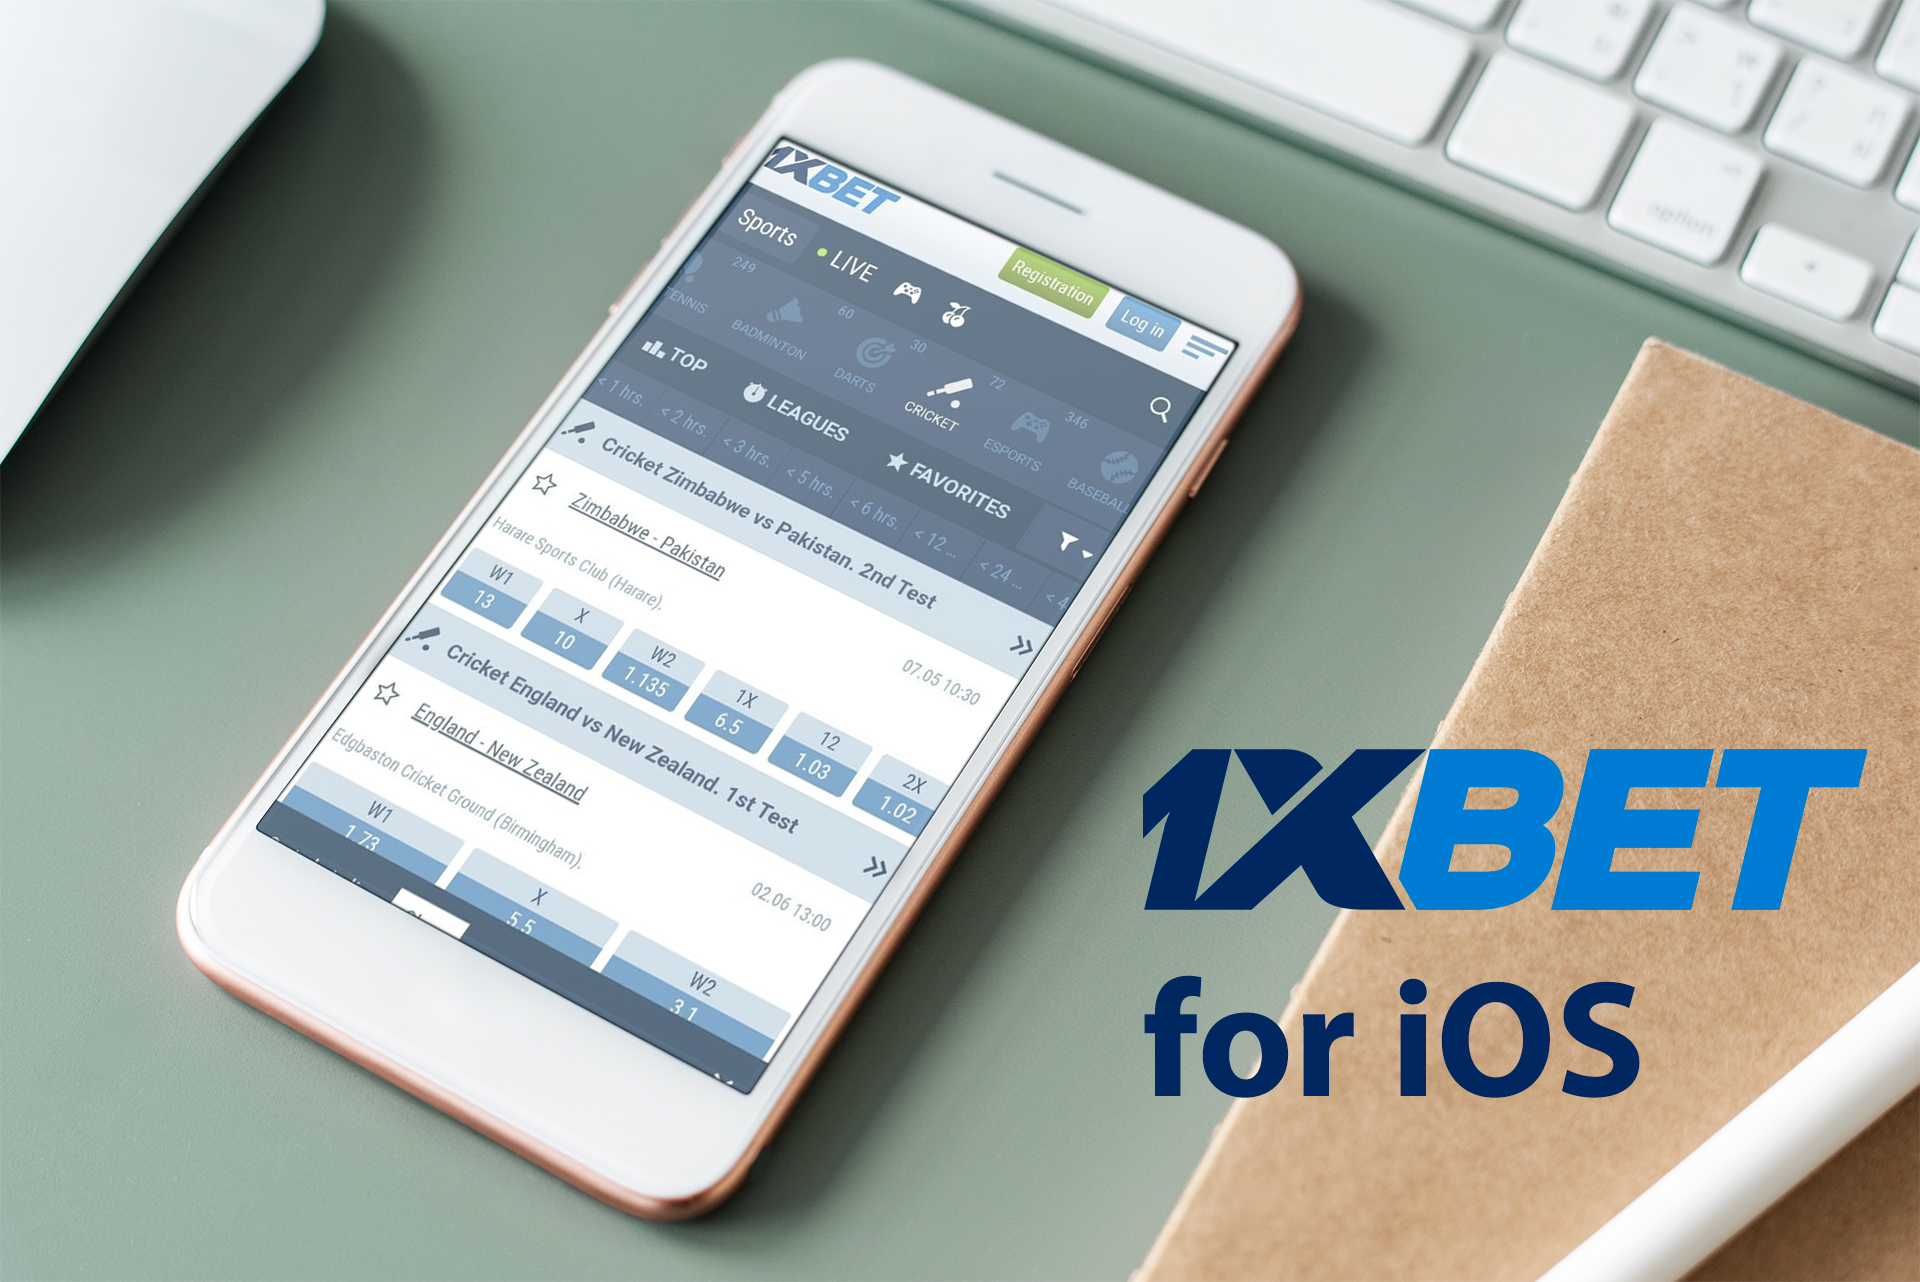 Mosth of the iOS devices accept the 1xbet app.